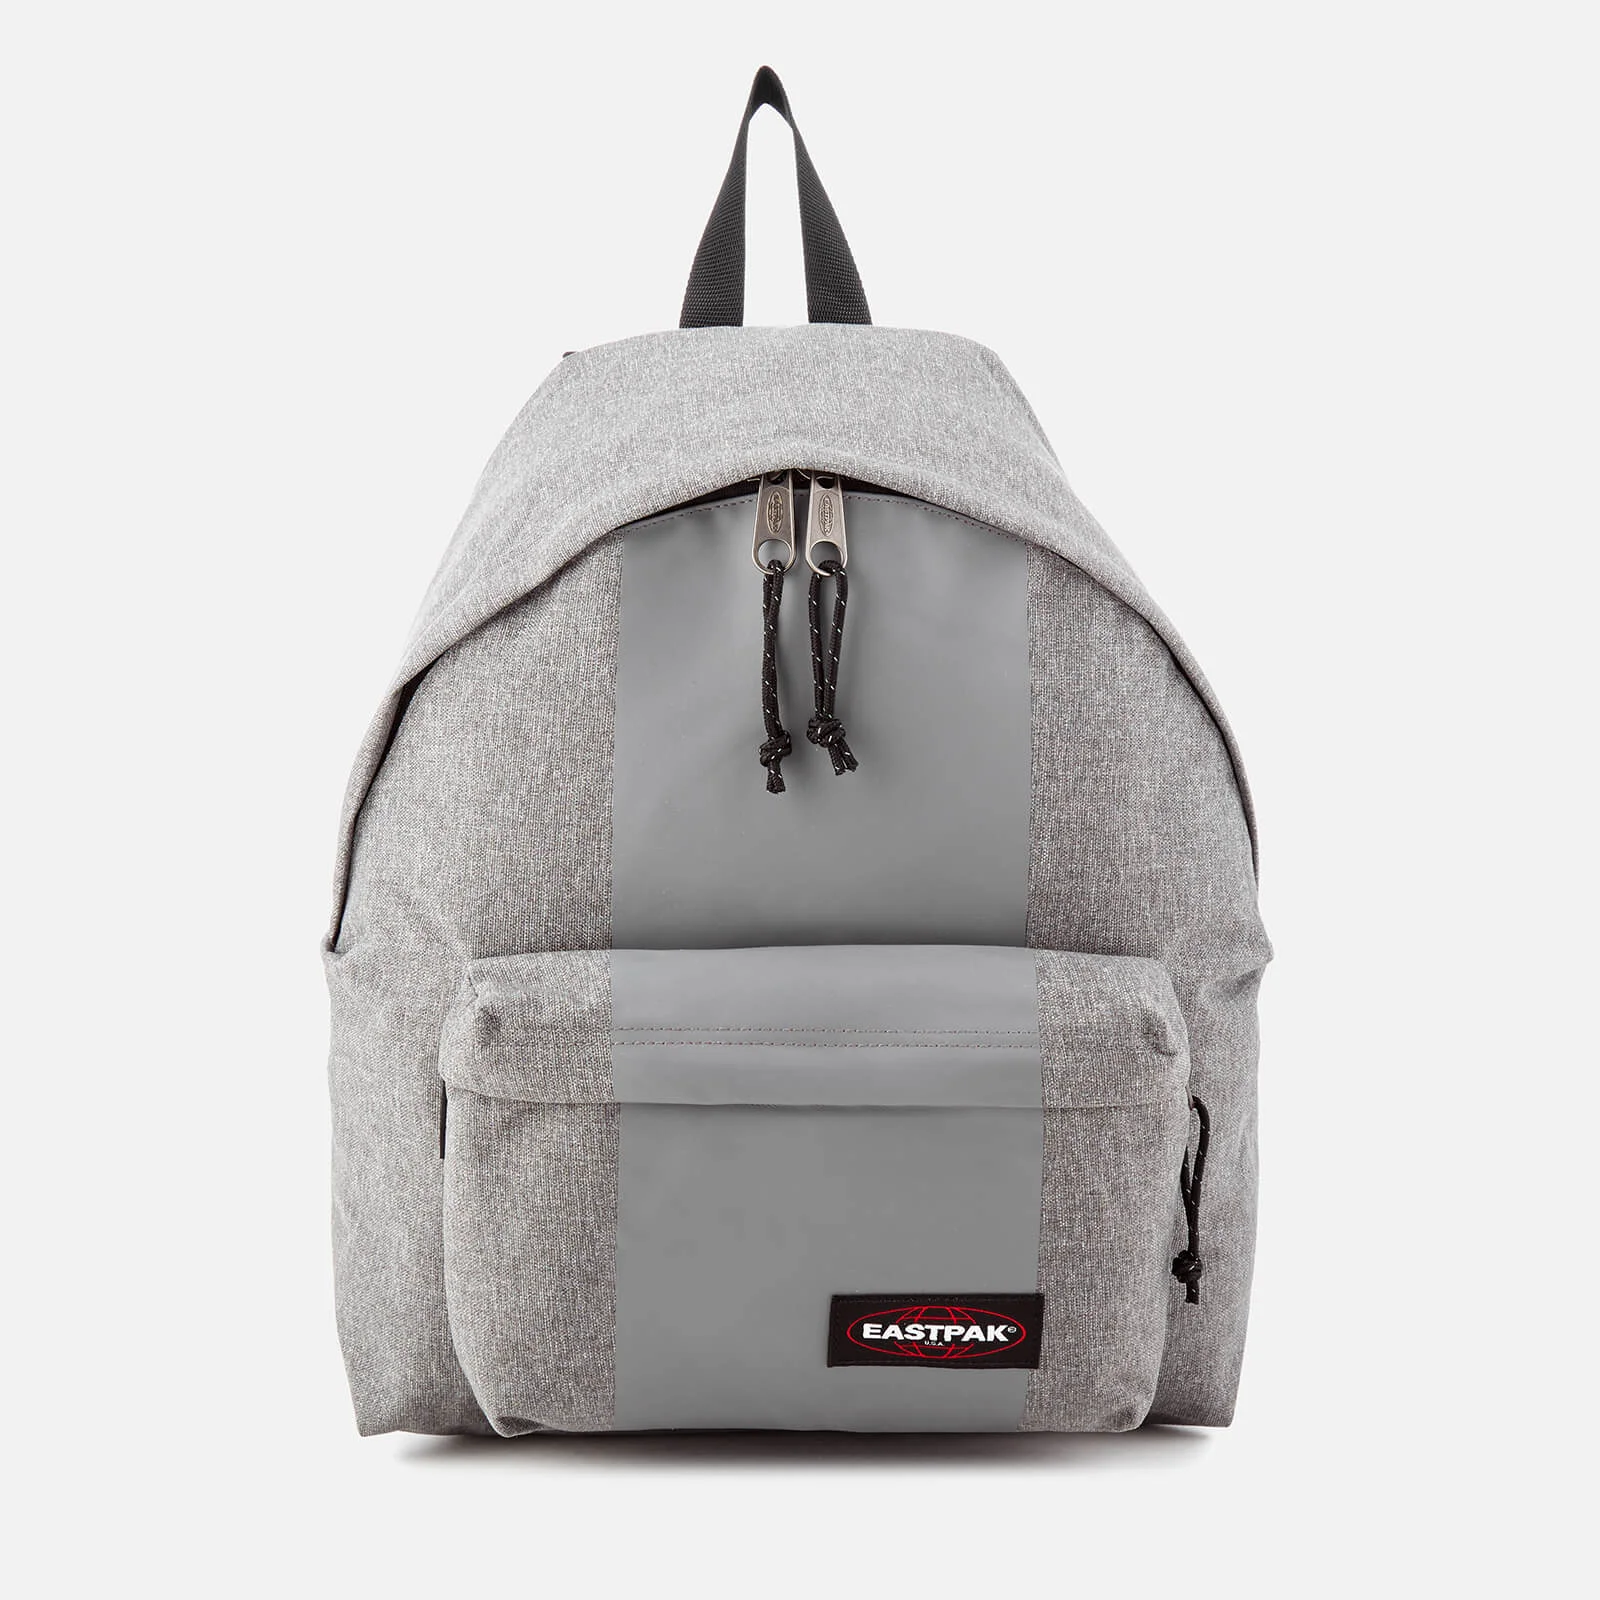 Eastpak Men's Authentic Rubber-Lay Padded Pak'r Backpack - Grey Rubber Image 1